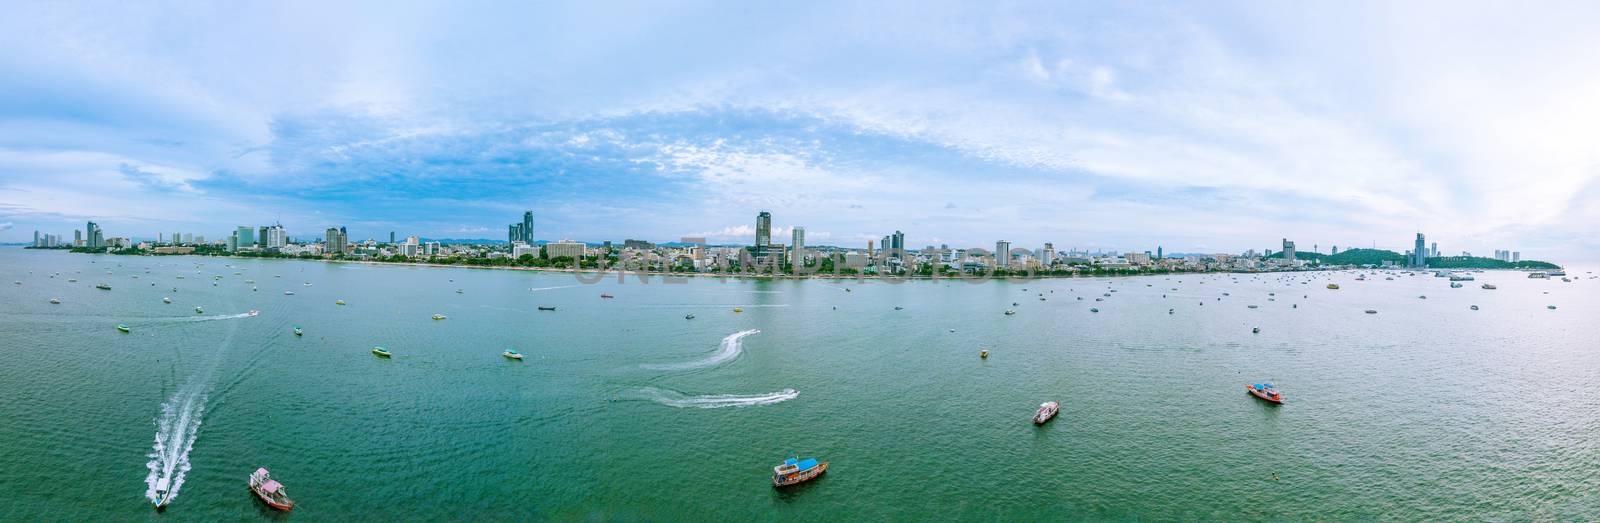 Pattaya cityscape panorama view from the sea by antpkr